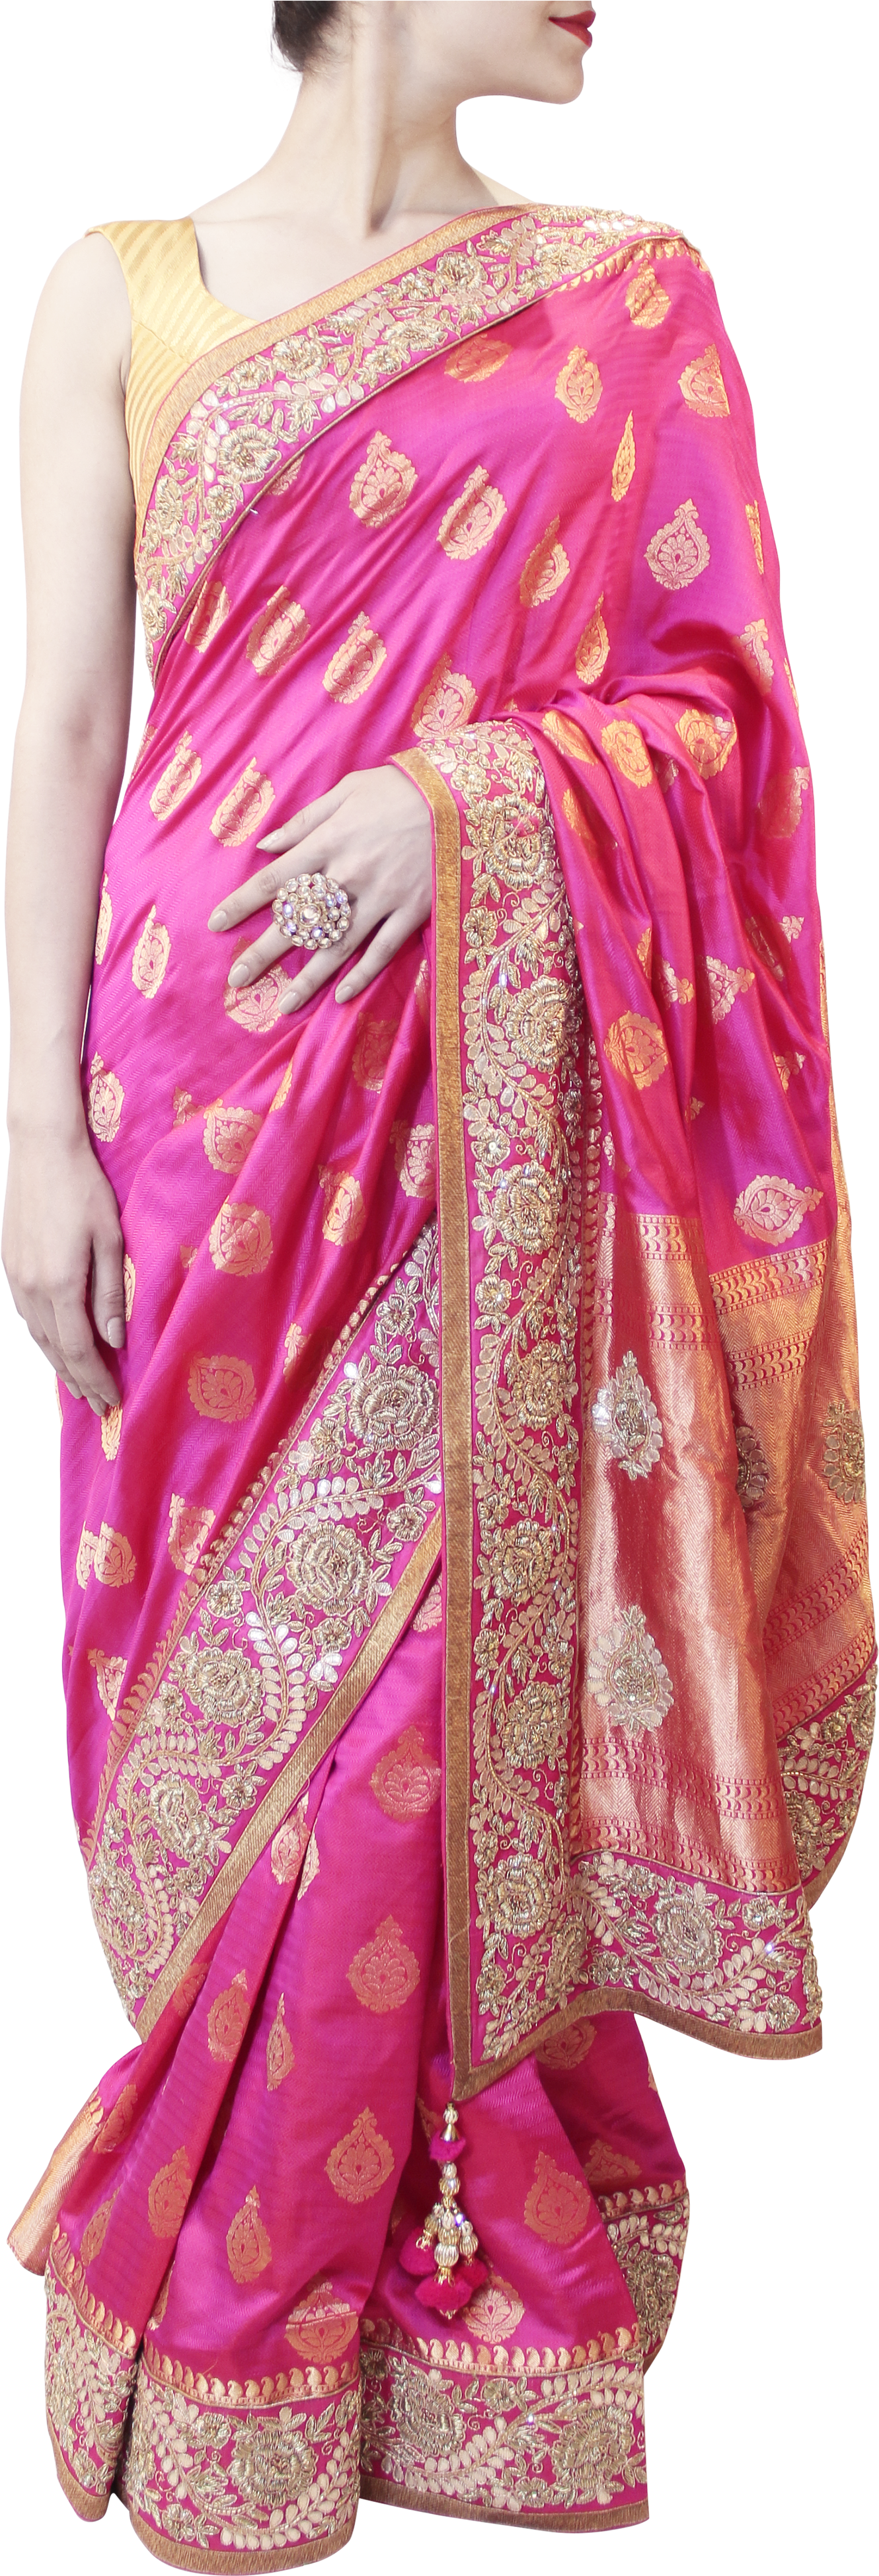 Elegant Pink Sareewith Gold Embroidery